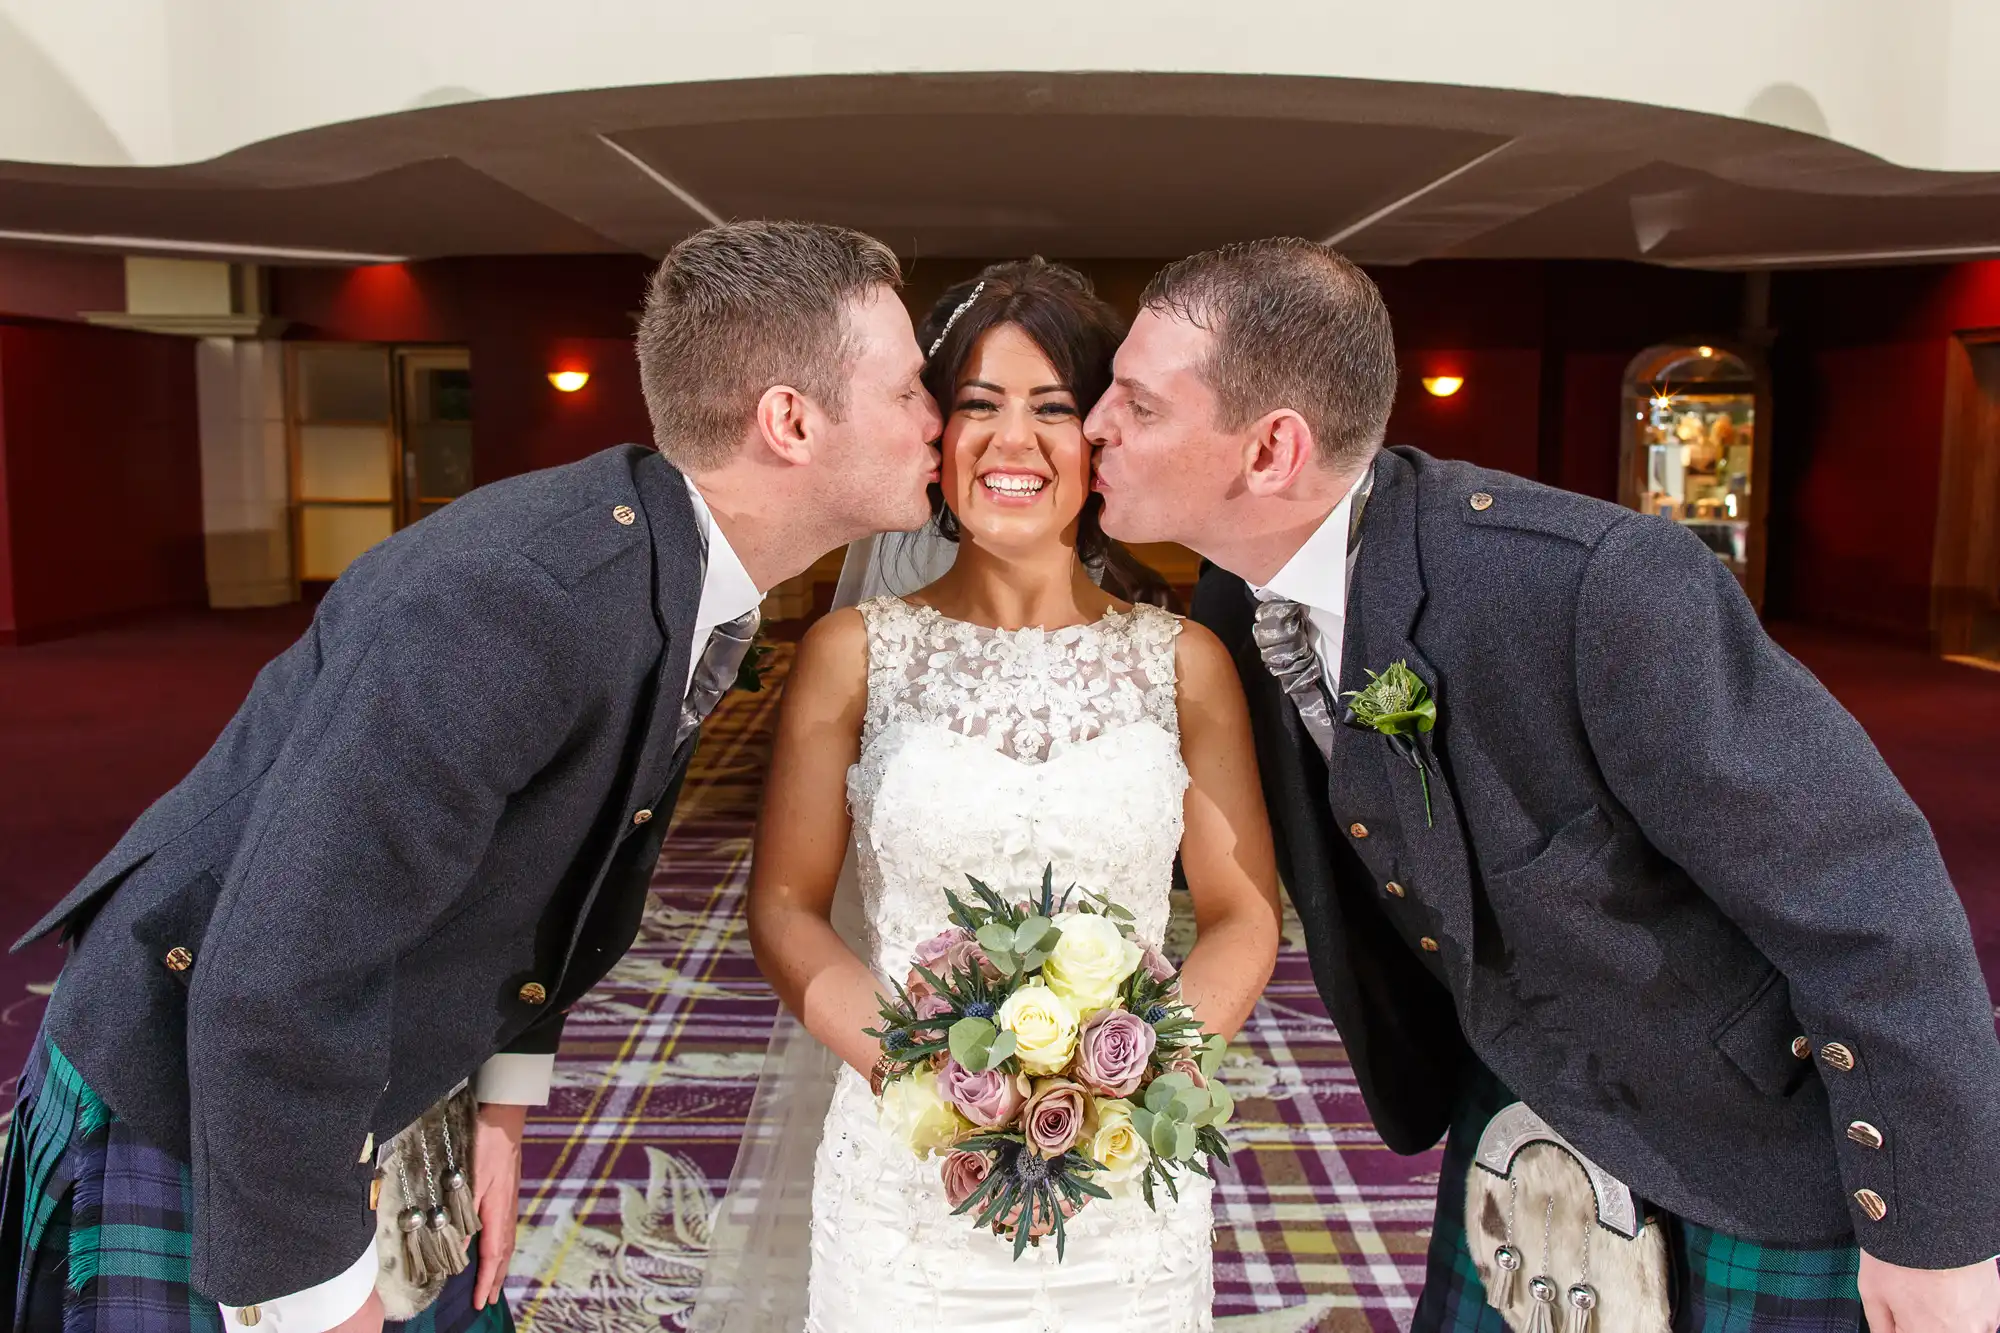 A bride holding a bouquet laughs as she is kissed on each cheek by two men in kilts and blazers at a wedding venue.